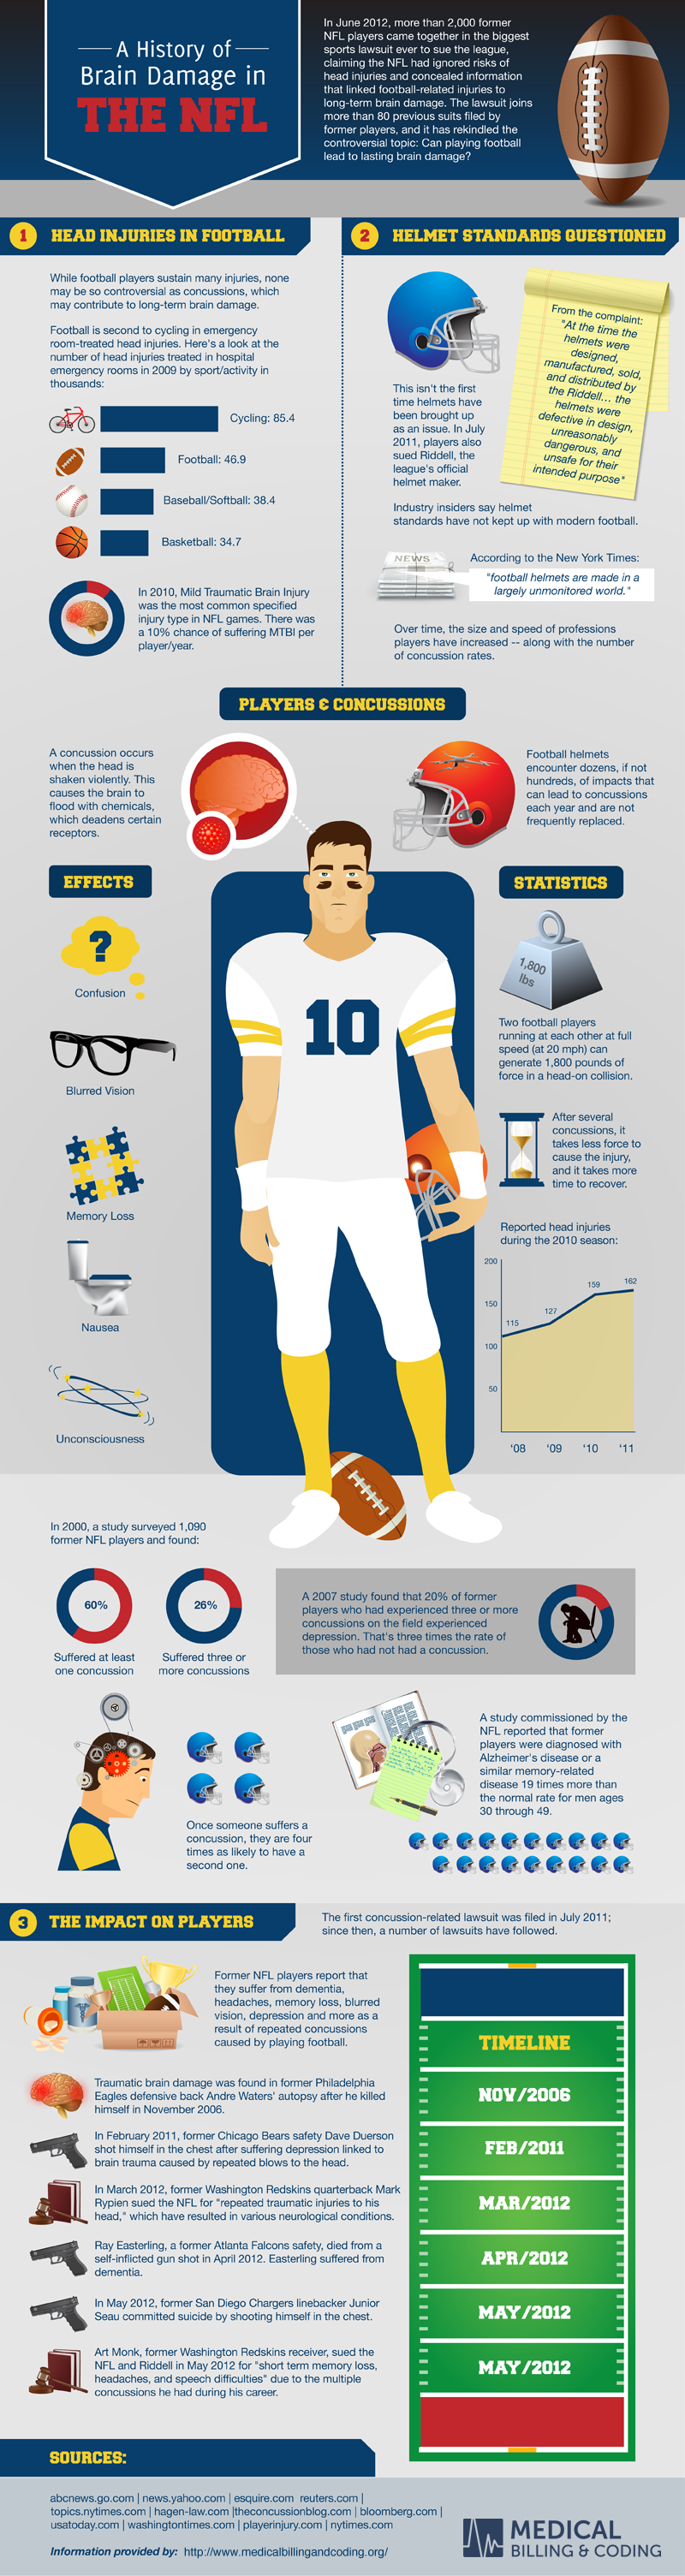 A History Of Brain Damage In The NFL (Infographic)